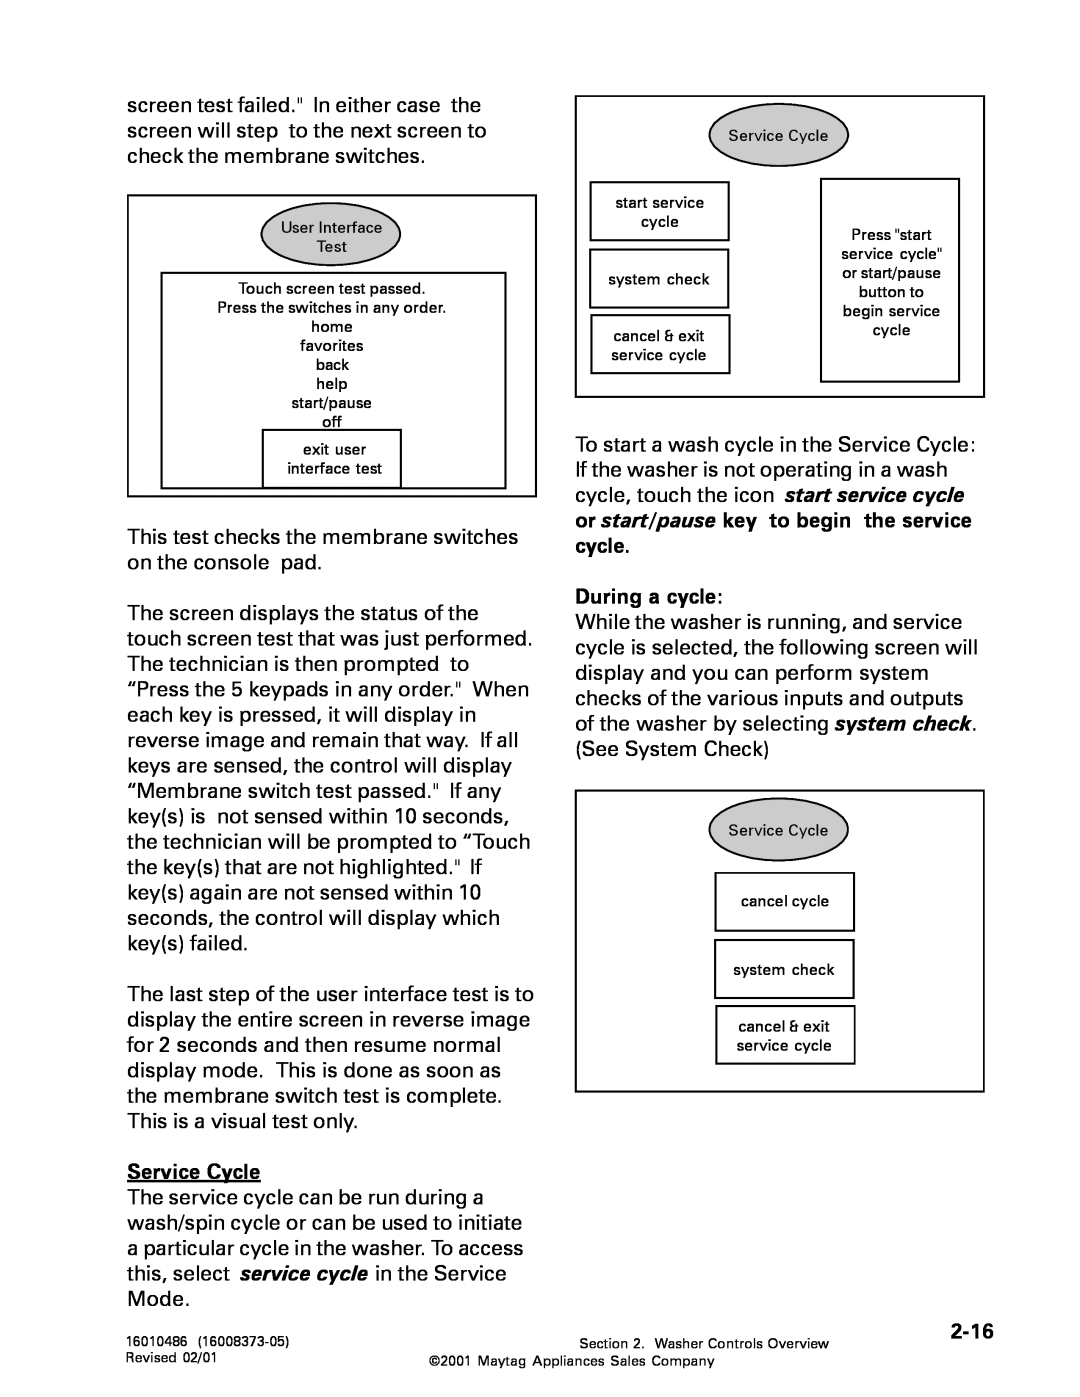 Whirlpool MAH3000 service manual Service Cycle, During a cycle, 2-16 